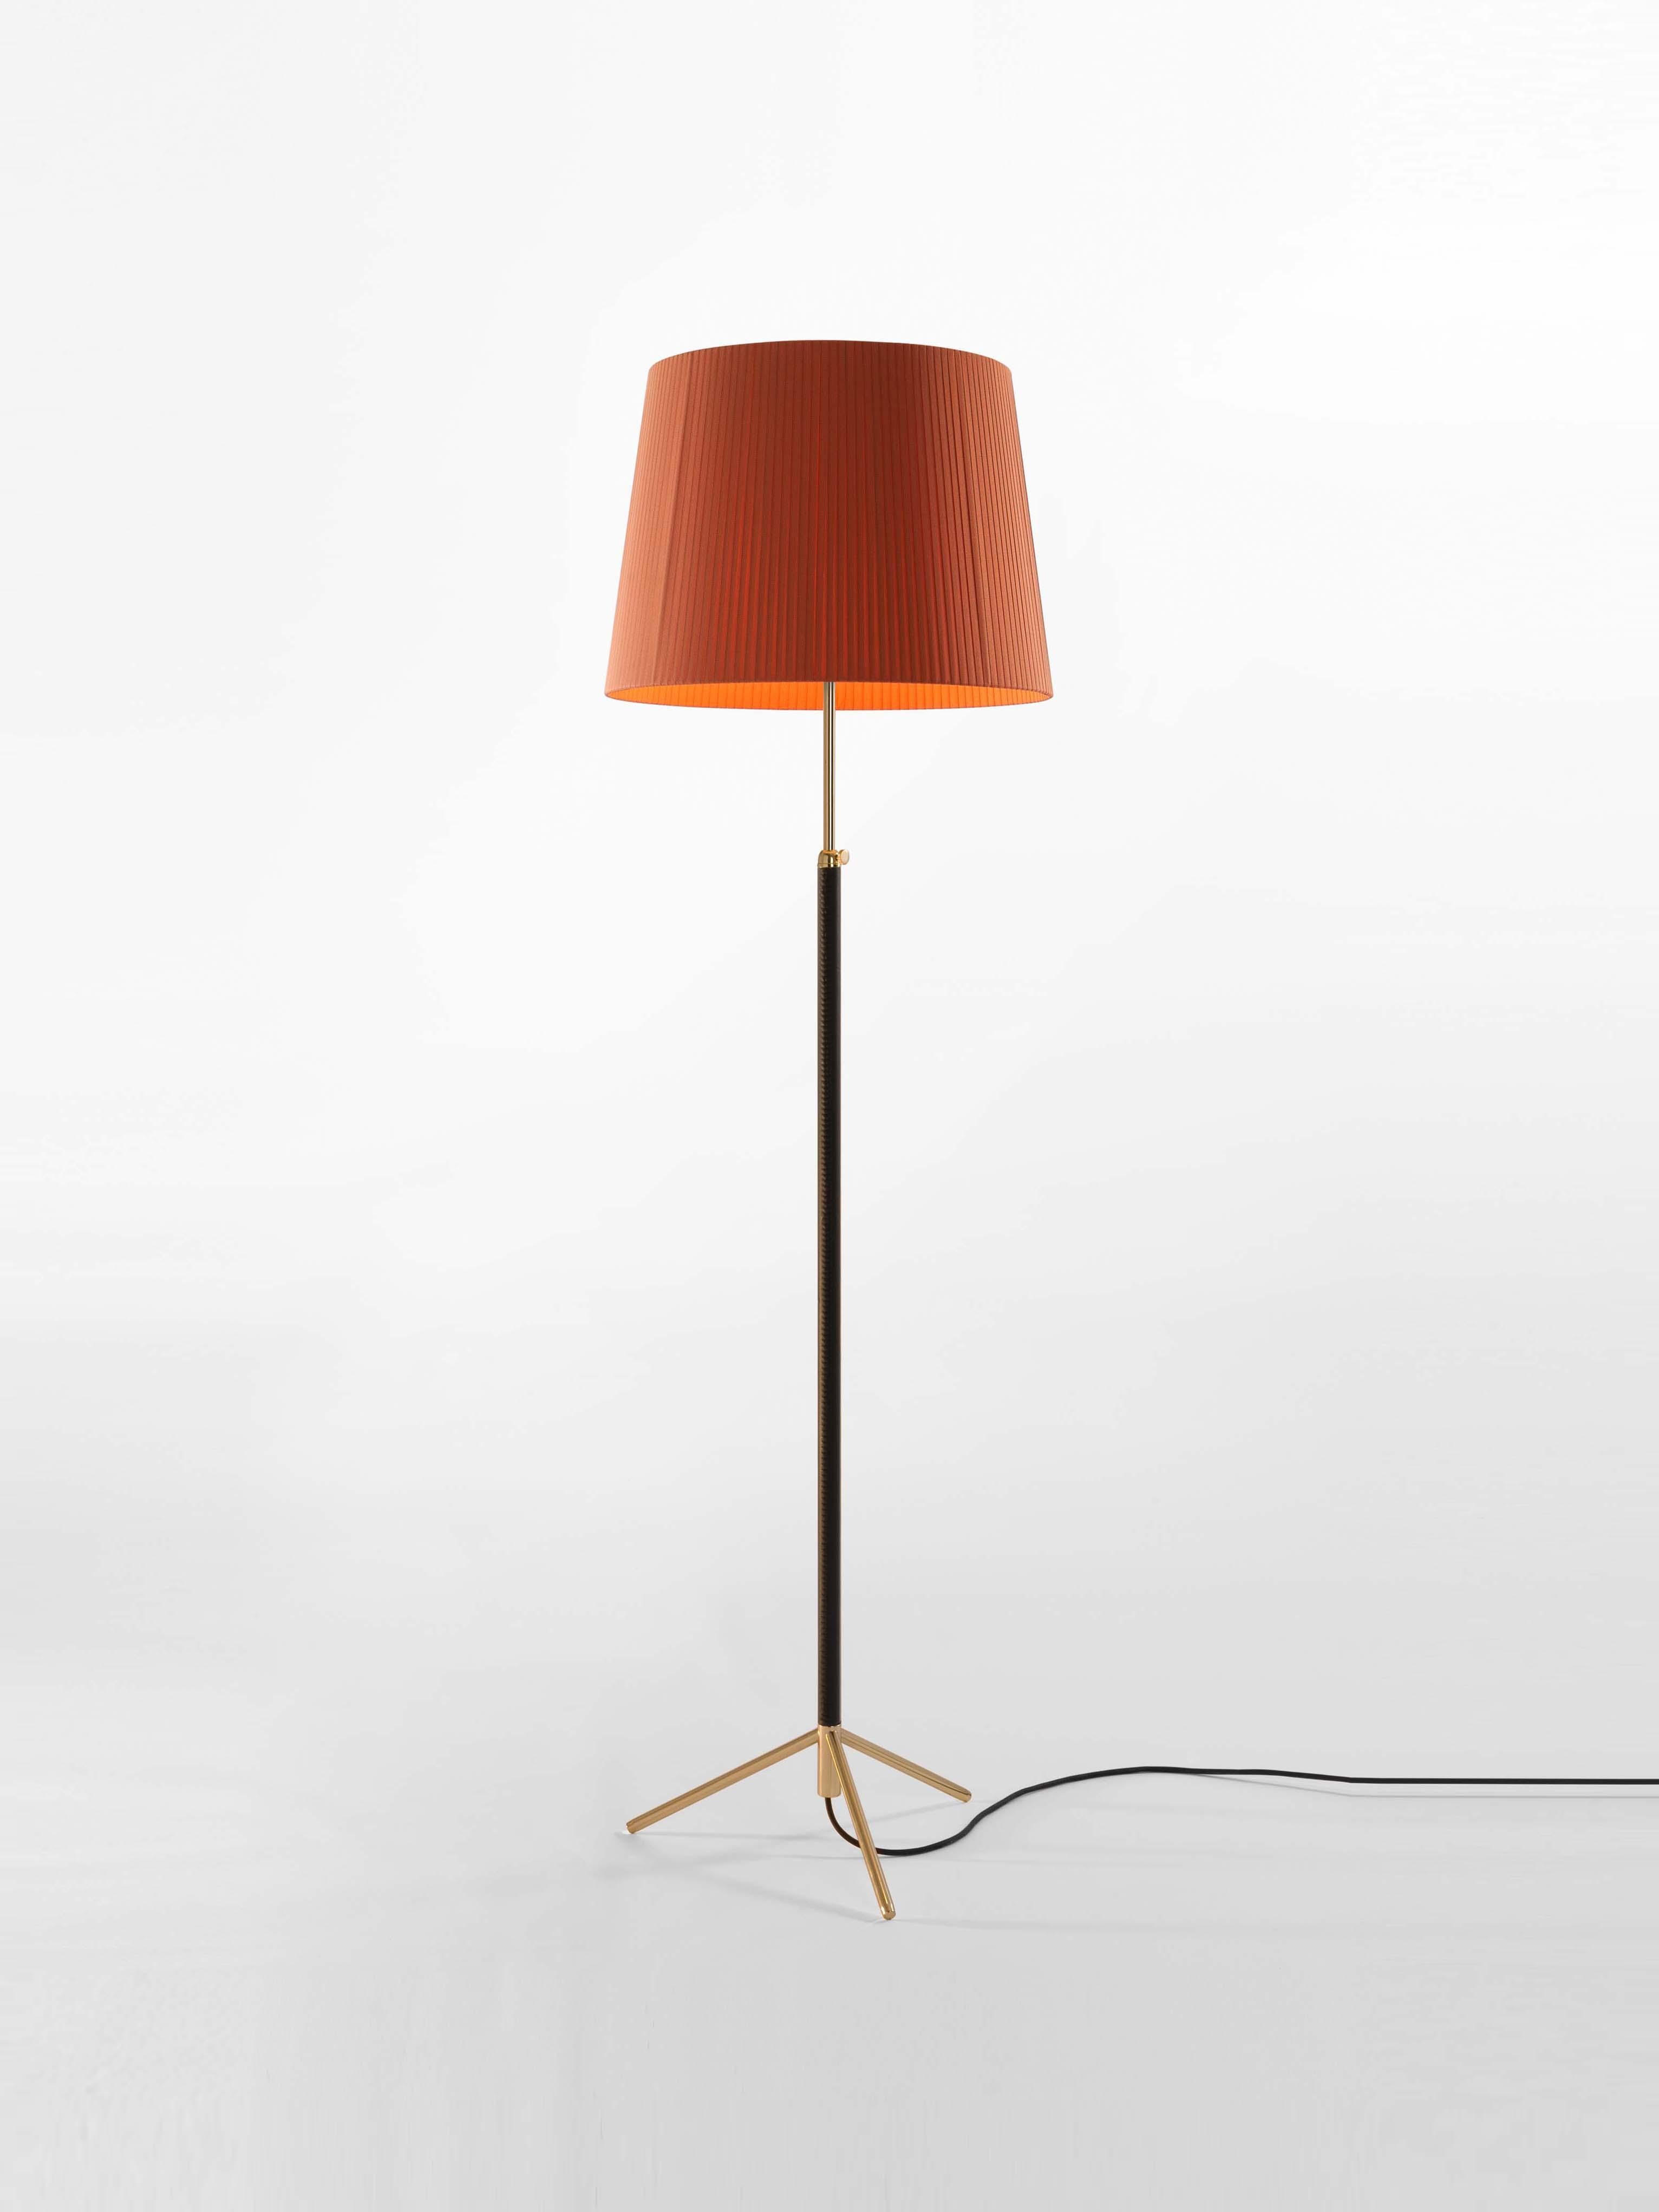 Terracotta and brass Pie de Salón G1 floor lamp by Jaume Sans
Dimensions: D 45 x H 120-160 cm
Materials: Metal, leather, ribbon.
Available in chrome-plated or polished brass structure.
Available in other shade colors and sizes.

This slender